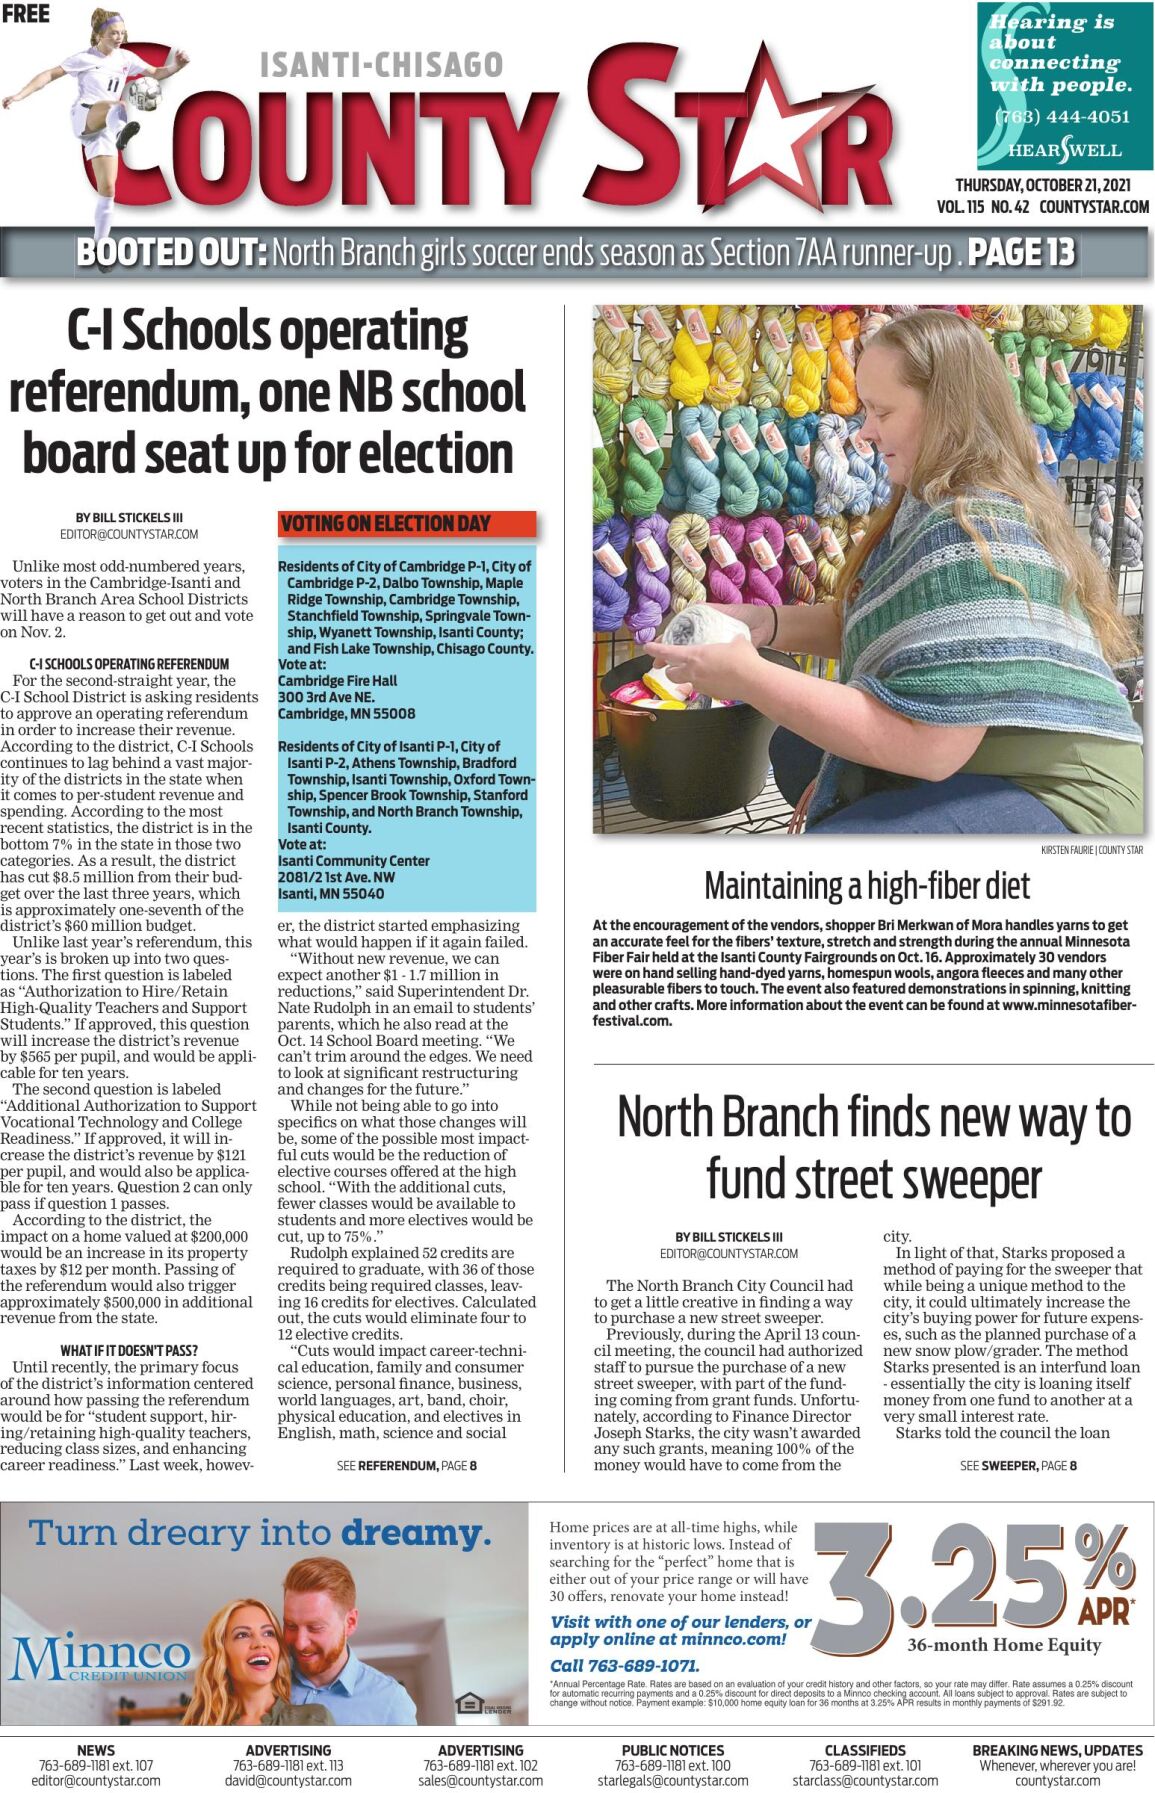 Isanti-Chisago County Star October 21, 2021 e-edition